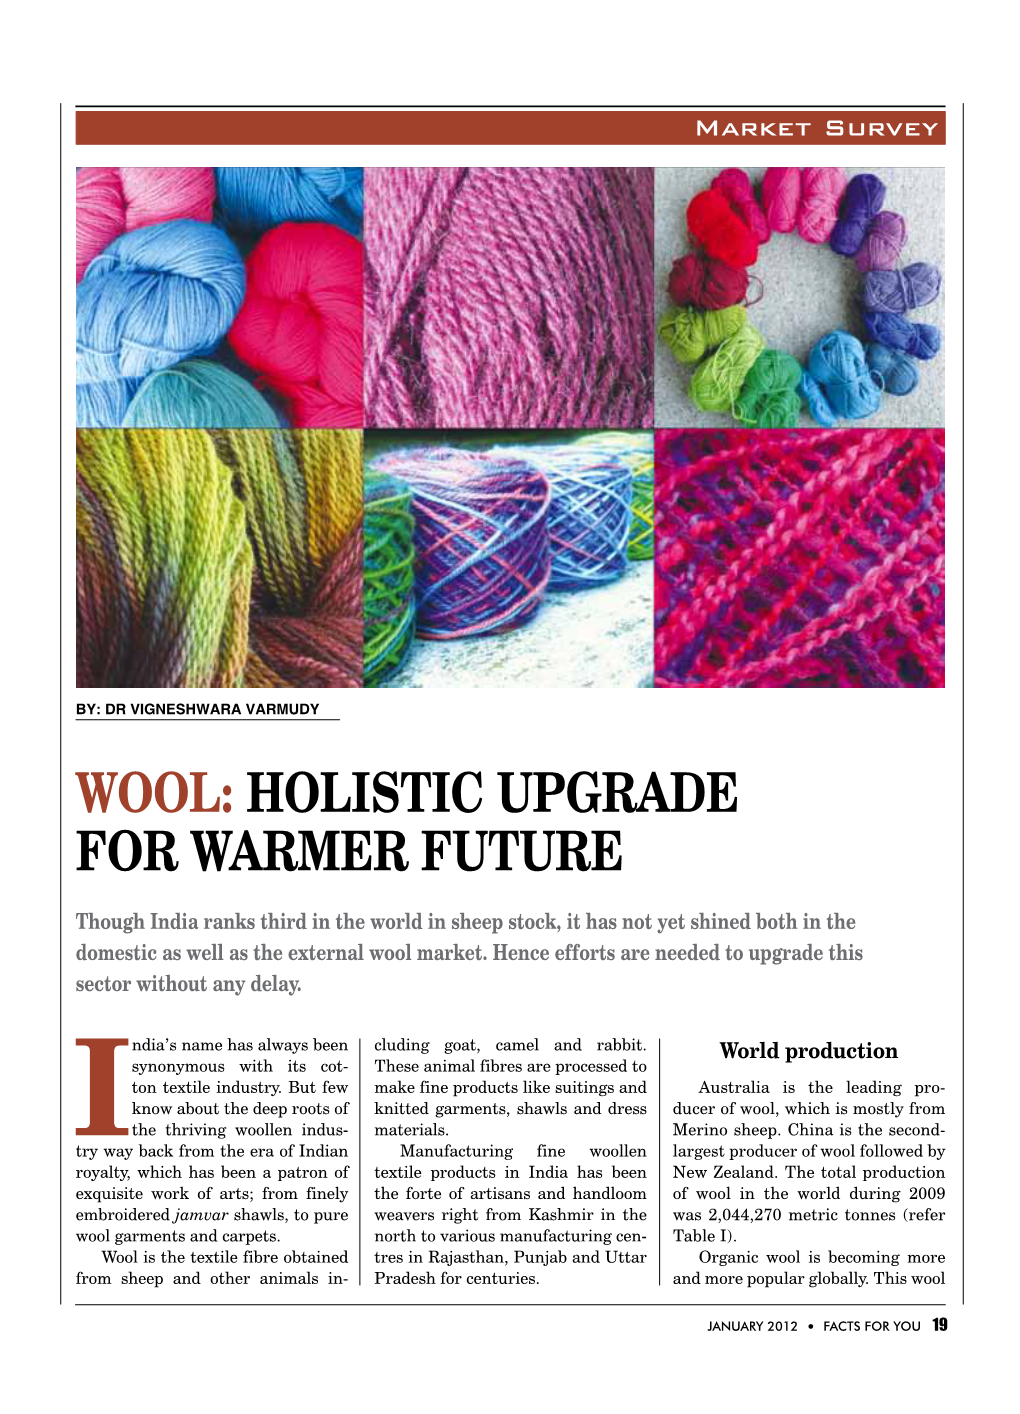 WOOL: Holistic Upgrade for Warmer Future